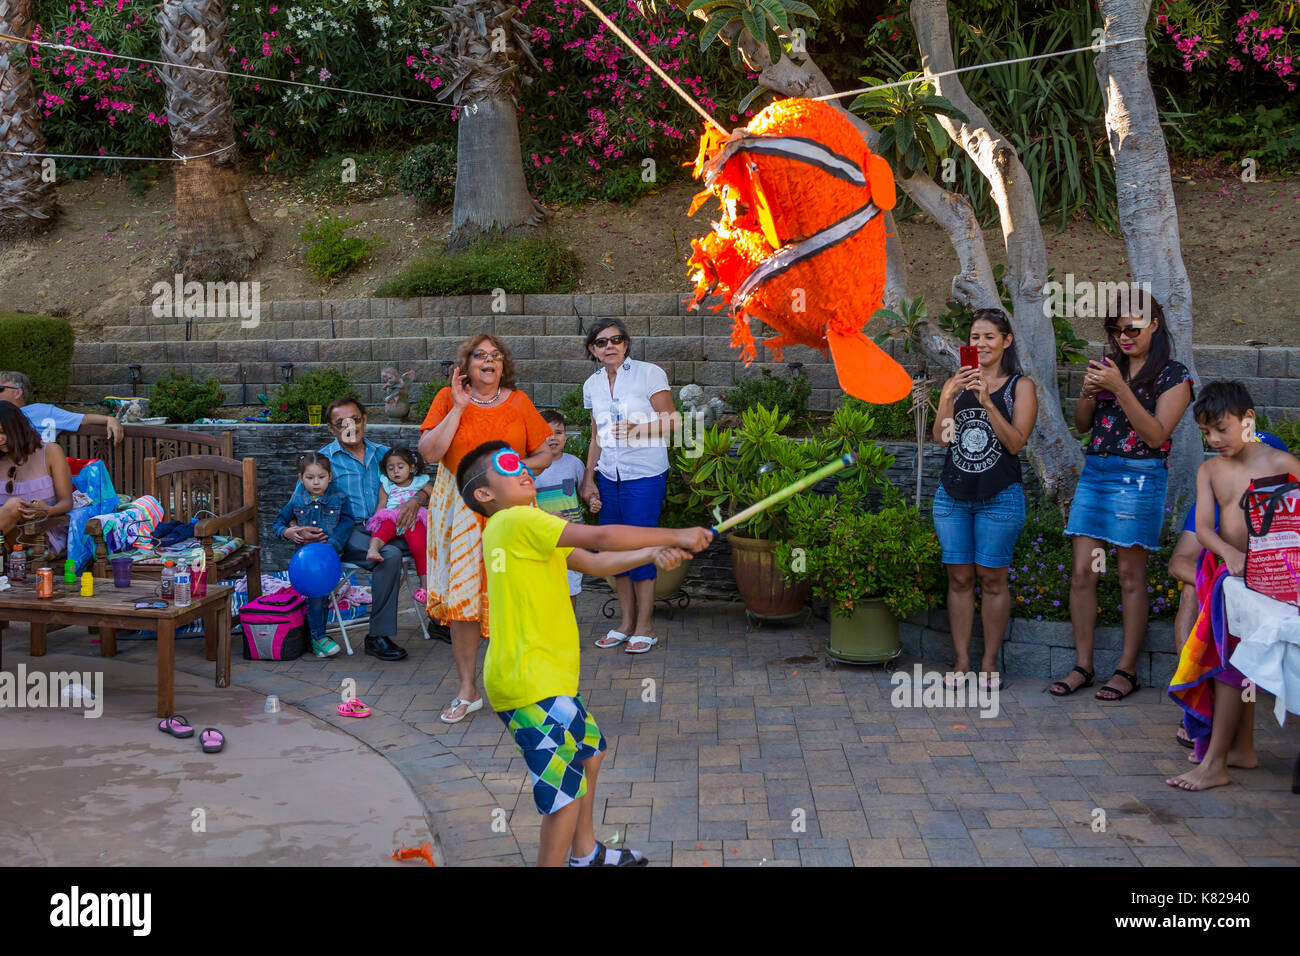 Hispanic boy, hitting a pinata, pinata filled with candy sweets and toys,  birthday party, Castro Valley, Alameda County, California, United States  Stock Photo - Alamy